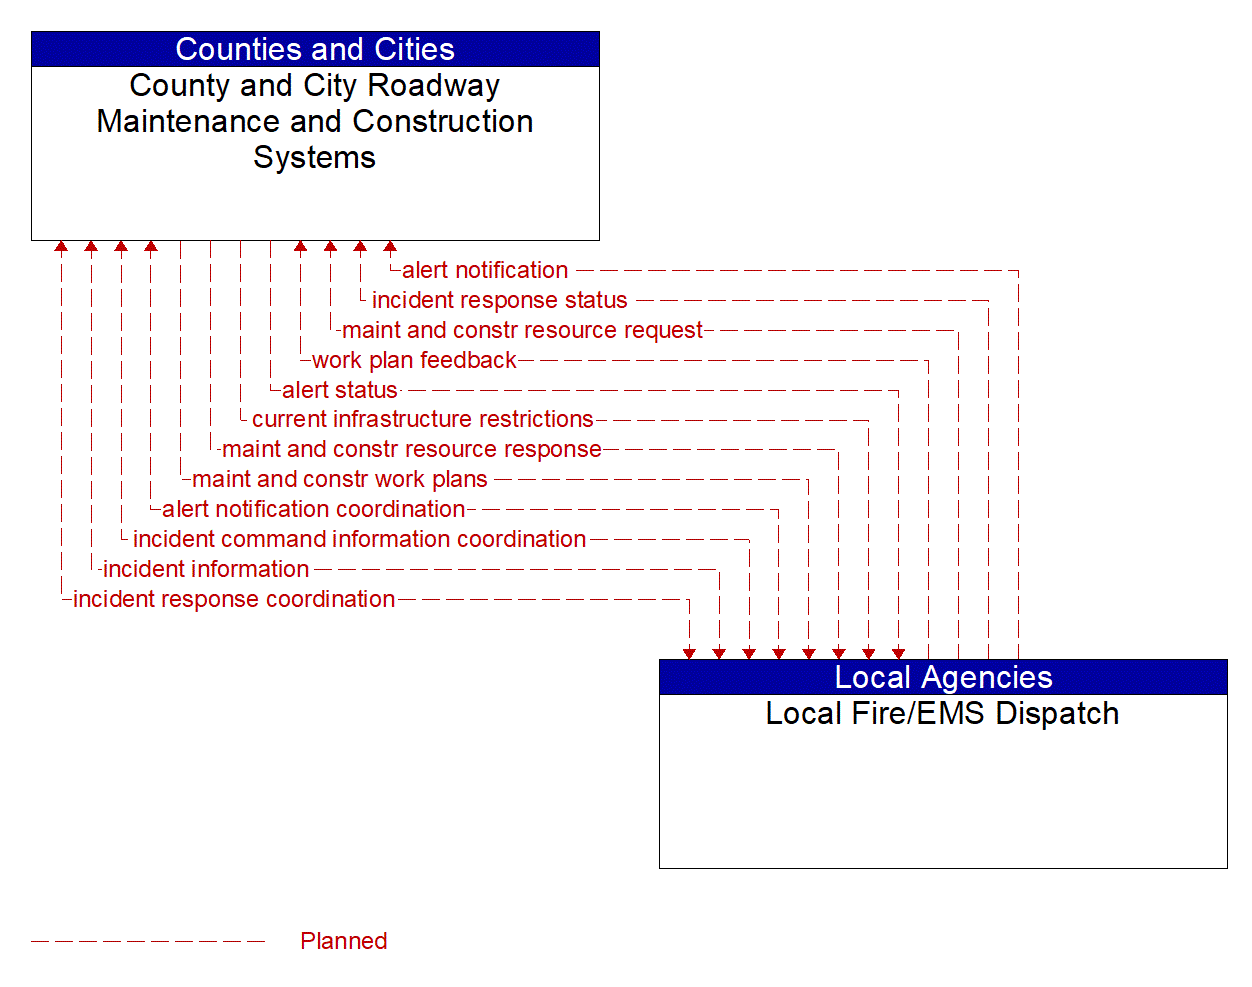 Architecture Flow Diagram: Local Fire/EMS Dispatch <--> County and City Roadway Maintenance and Construction Systems